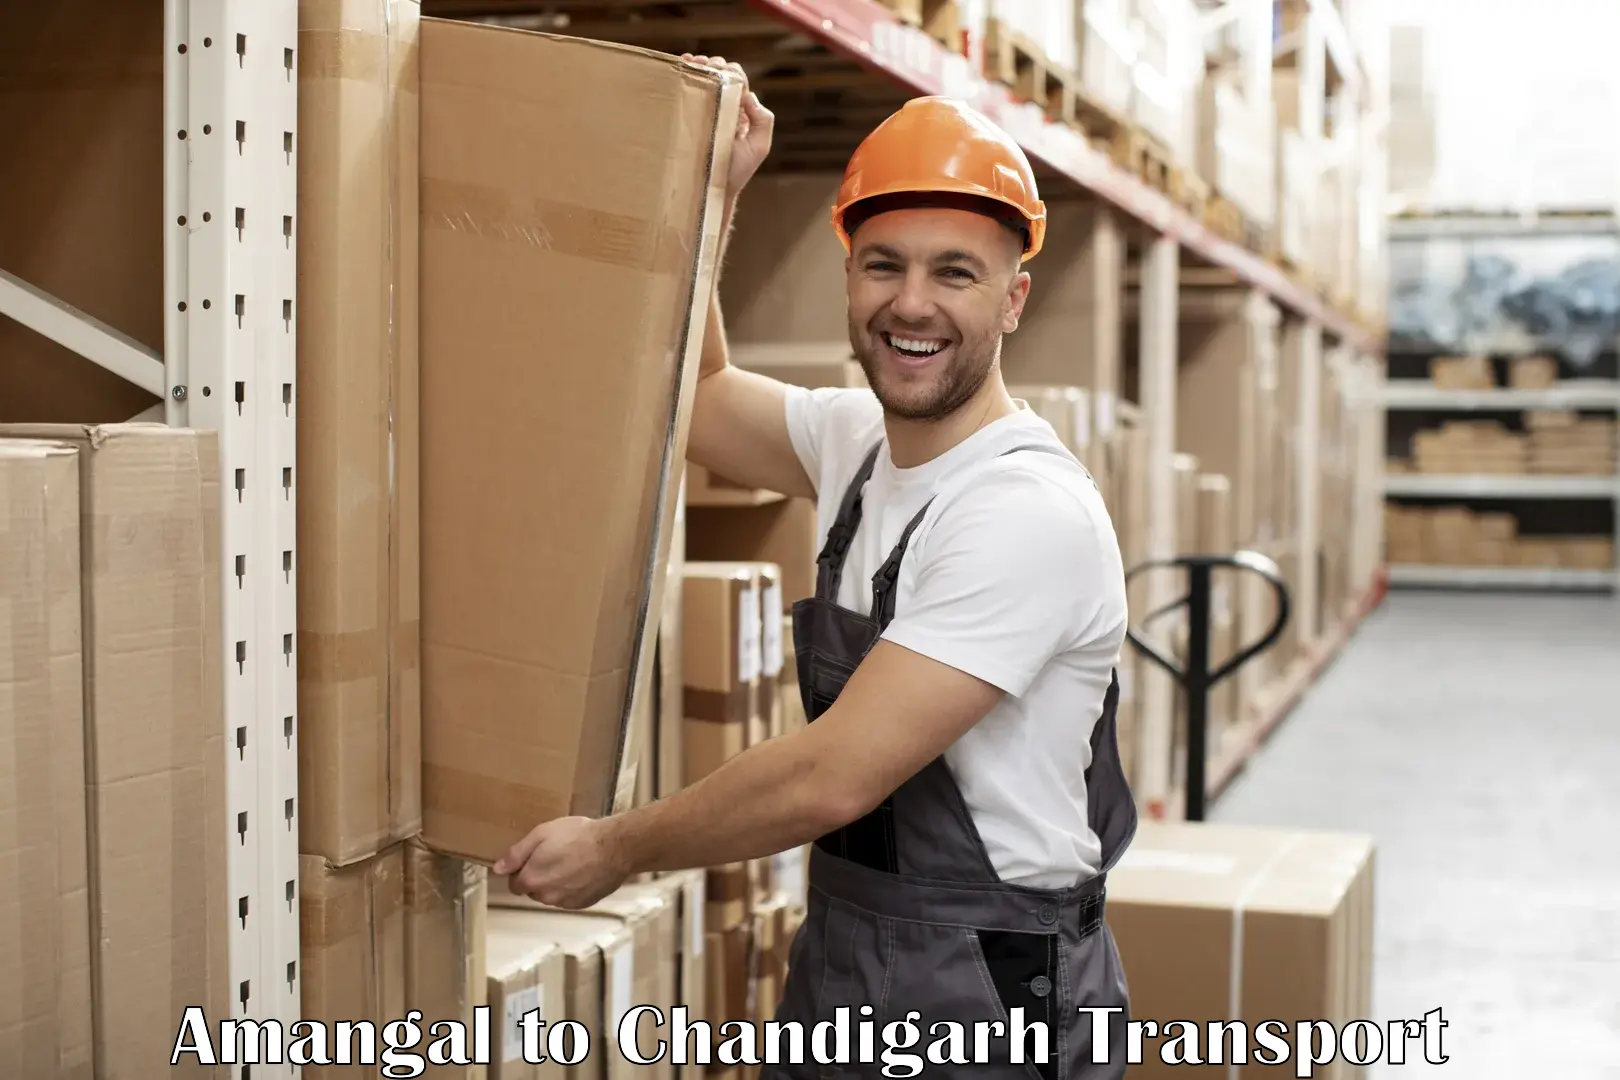 Delivery service Amangal to Chandigarh